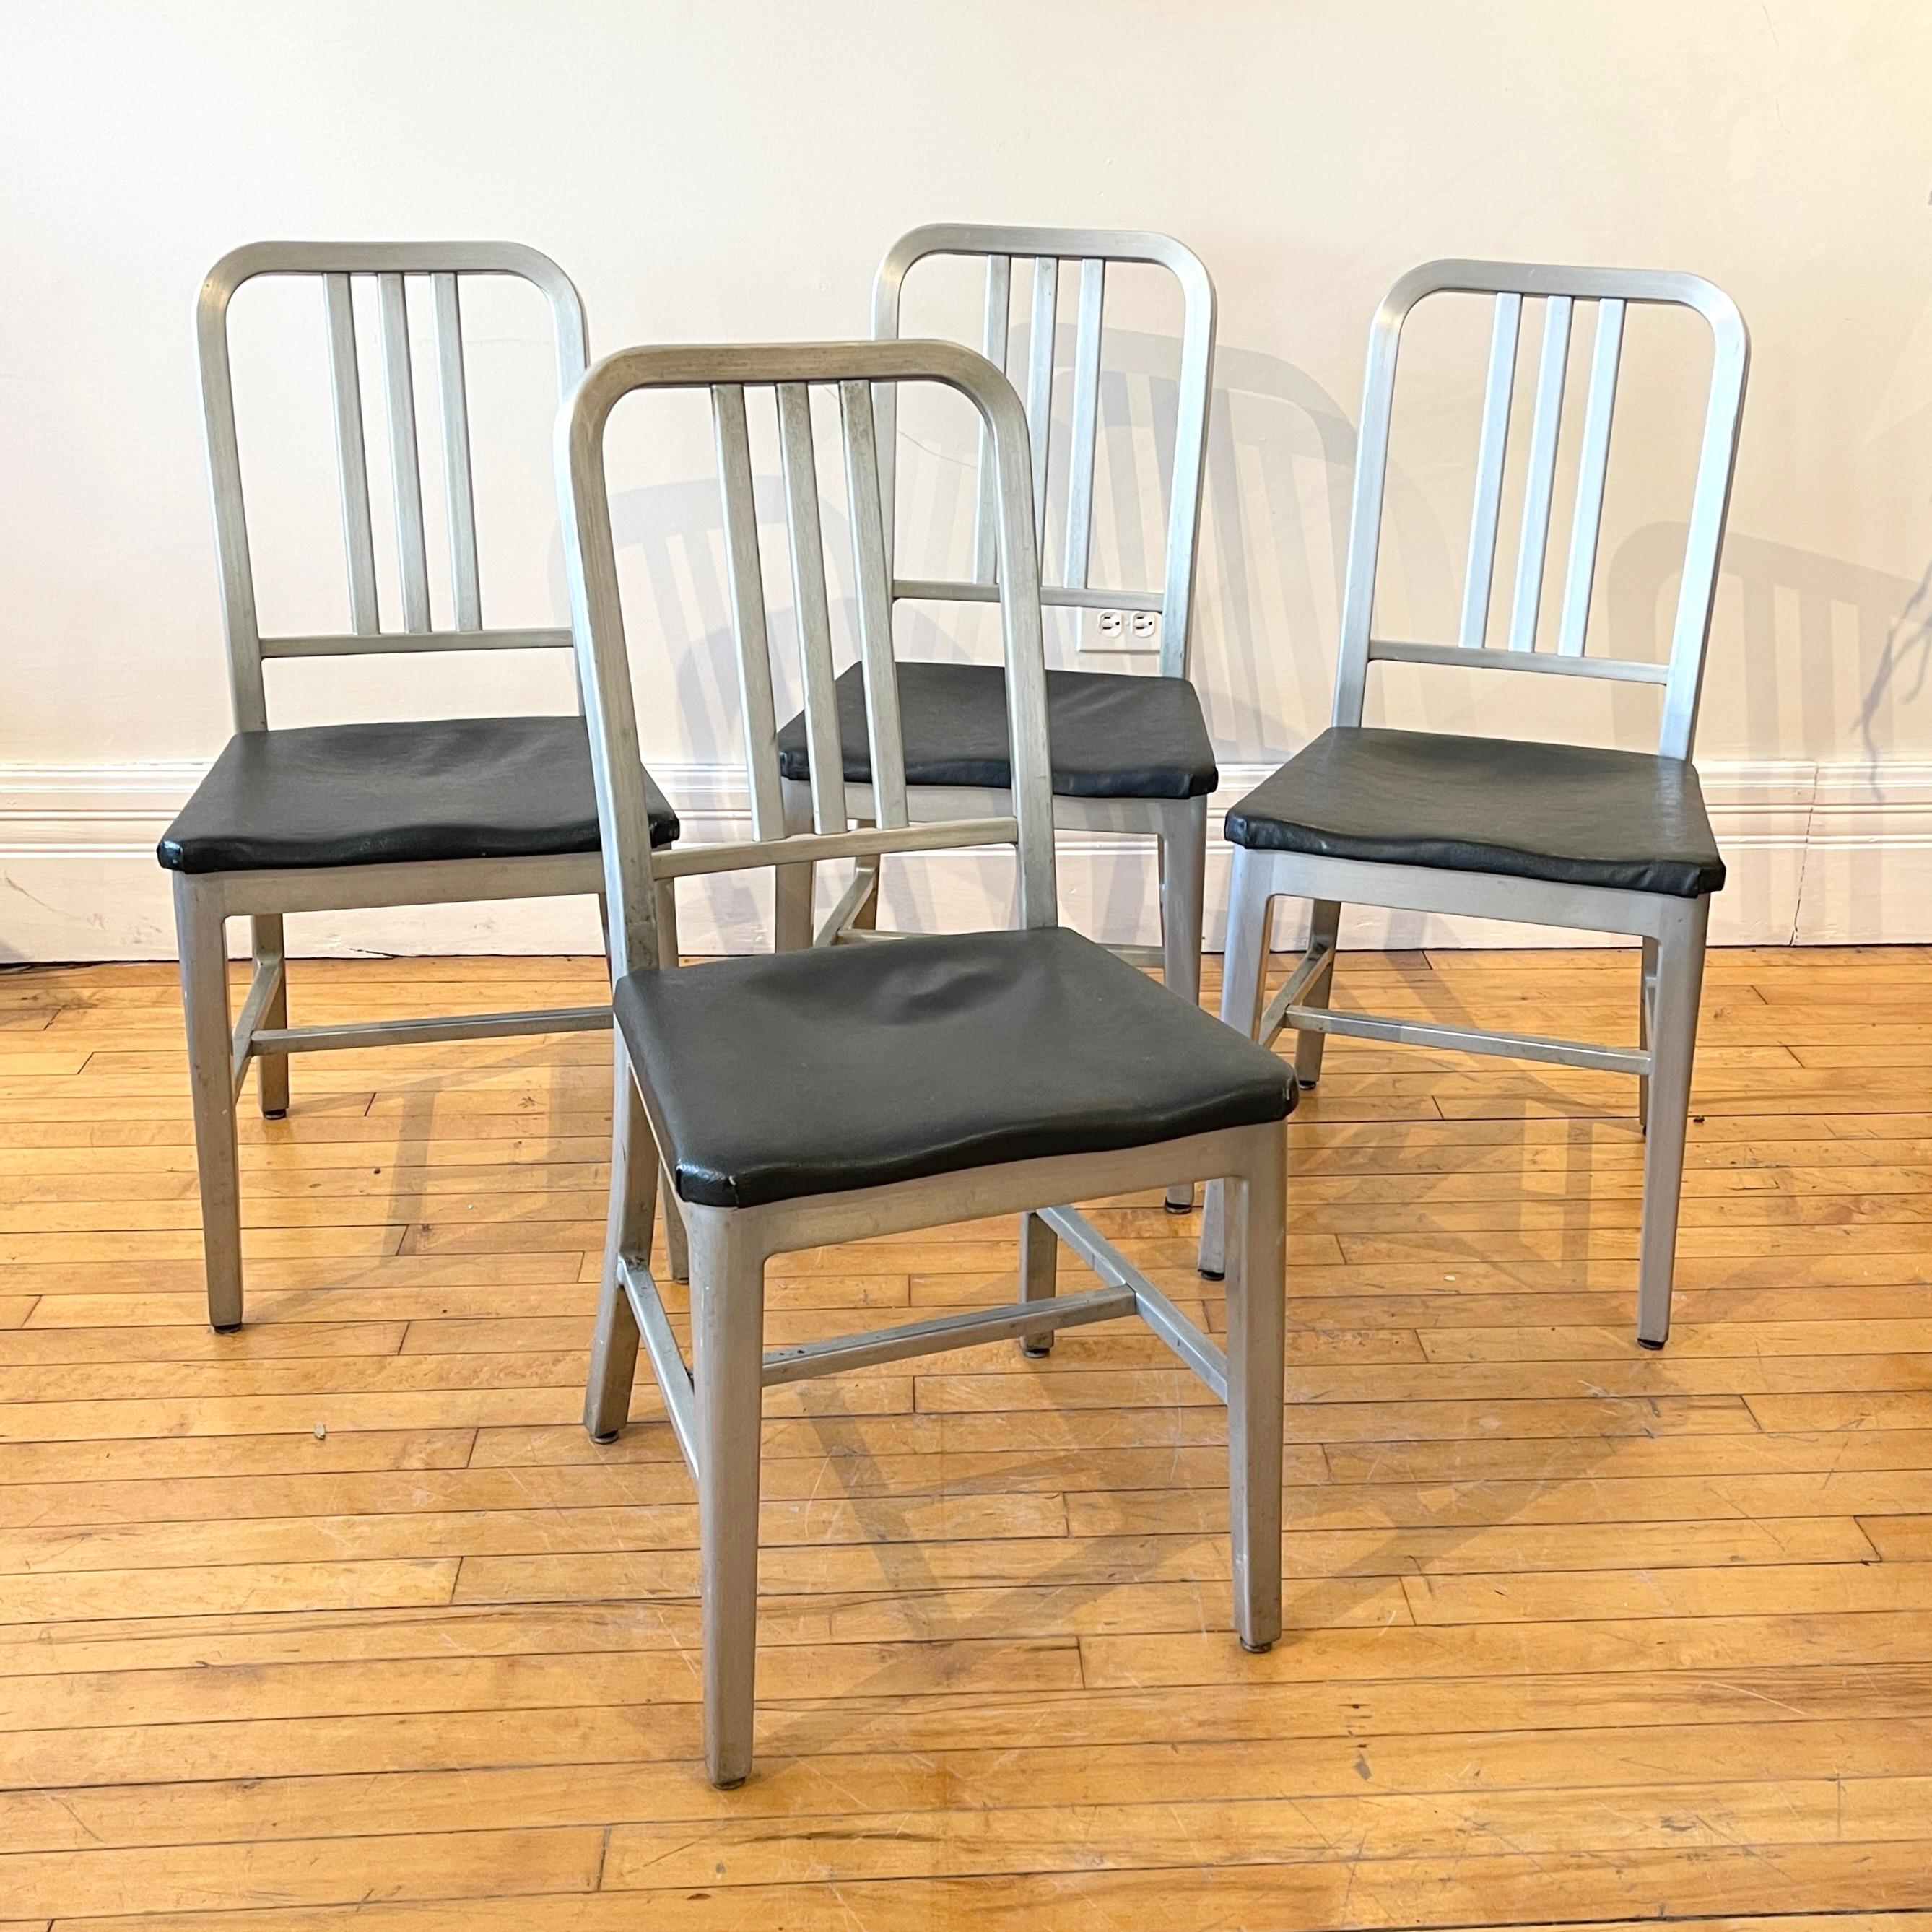 20th Century Early Original Navy Chairs by Goodform / General Fireproofing 60 Available